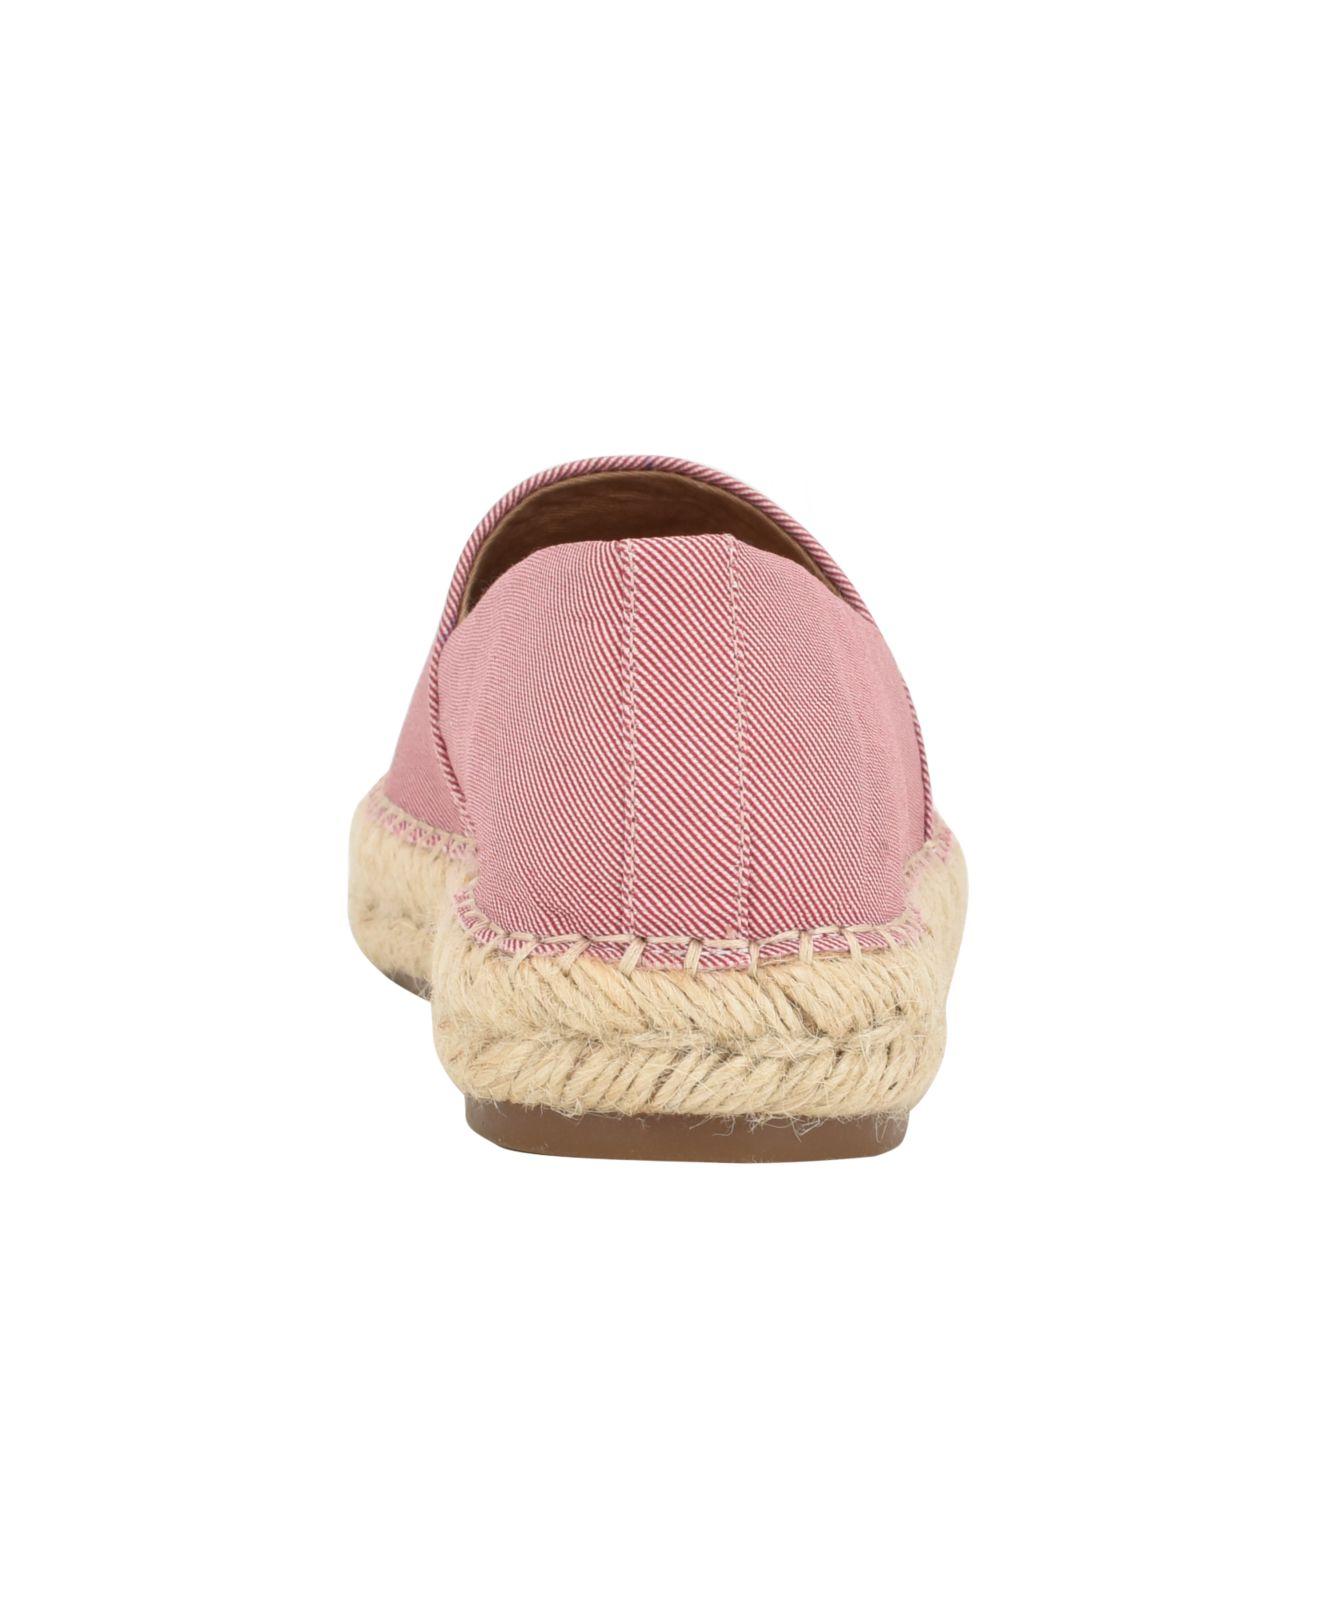 Tommy Hilfiger Peanni Flat Espadrille Closed Toe Shoes in Pink | Lyst